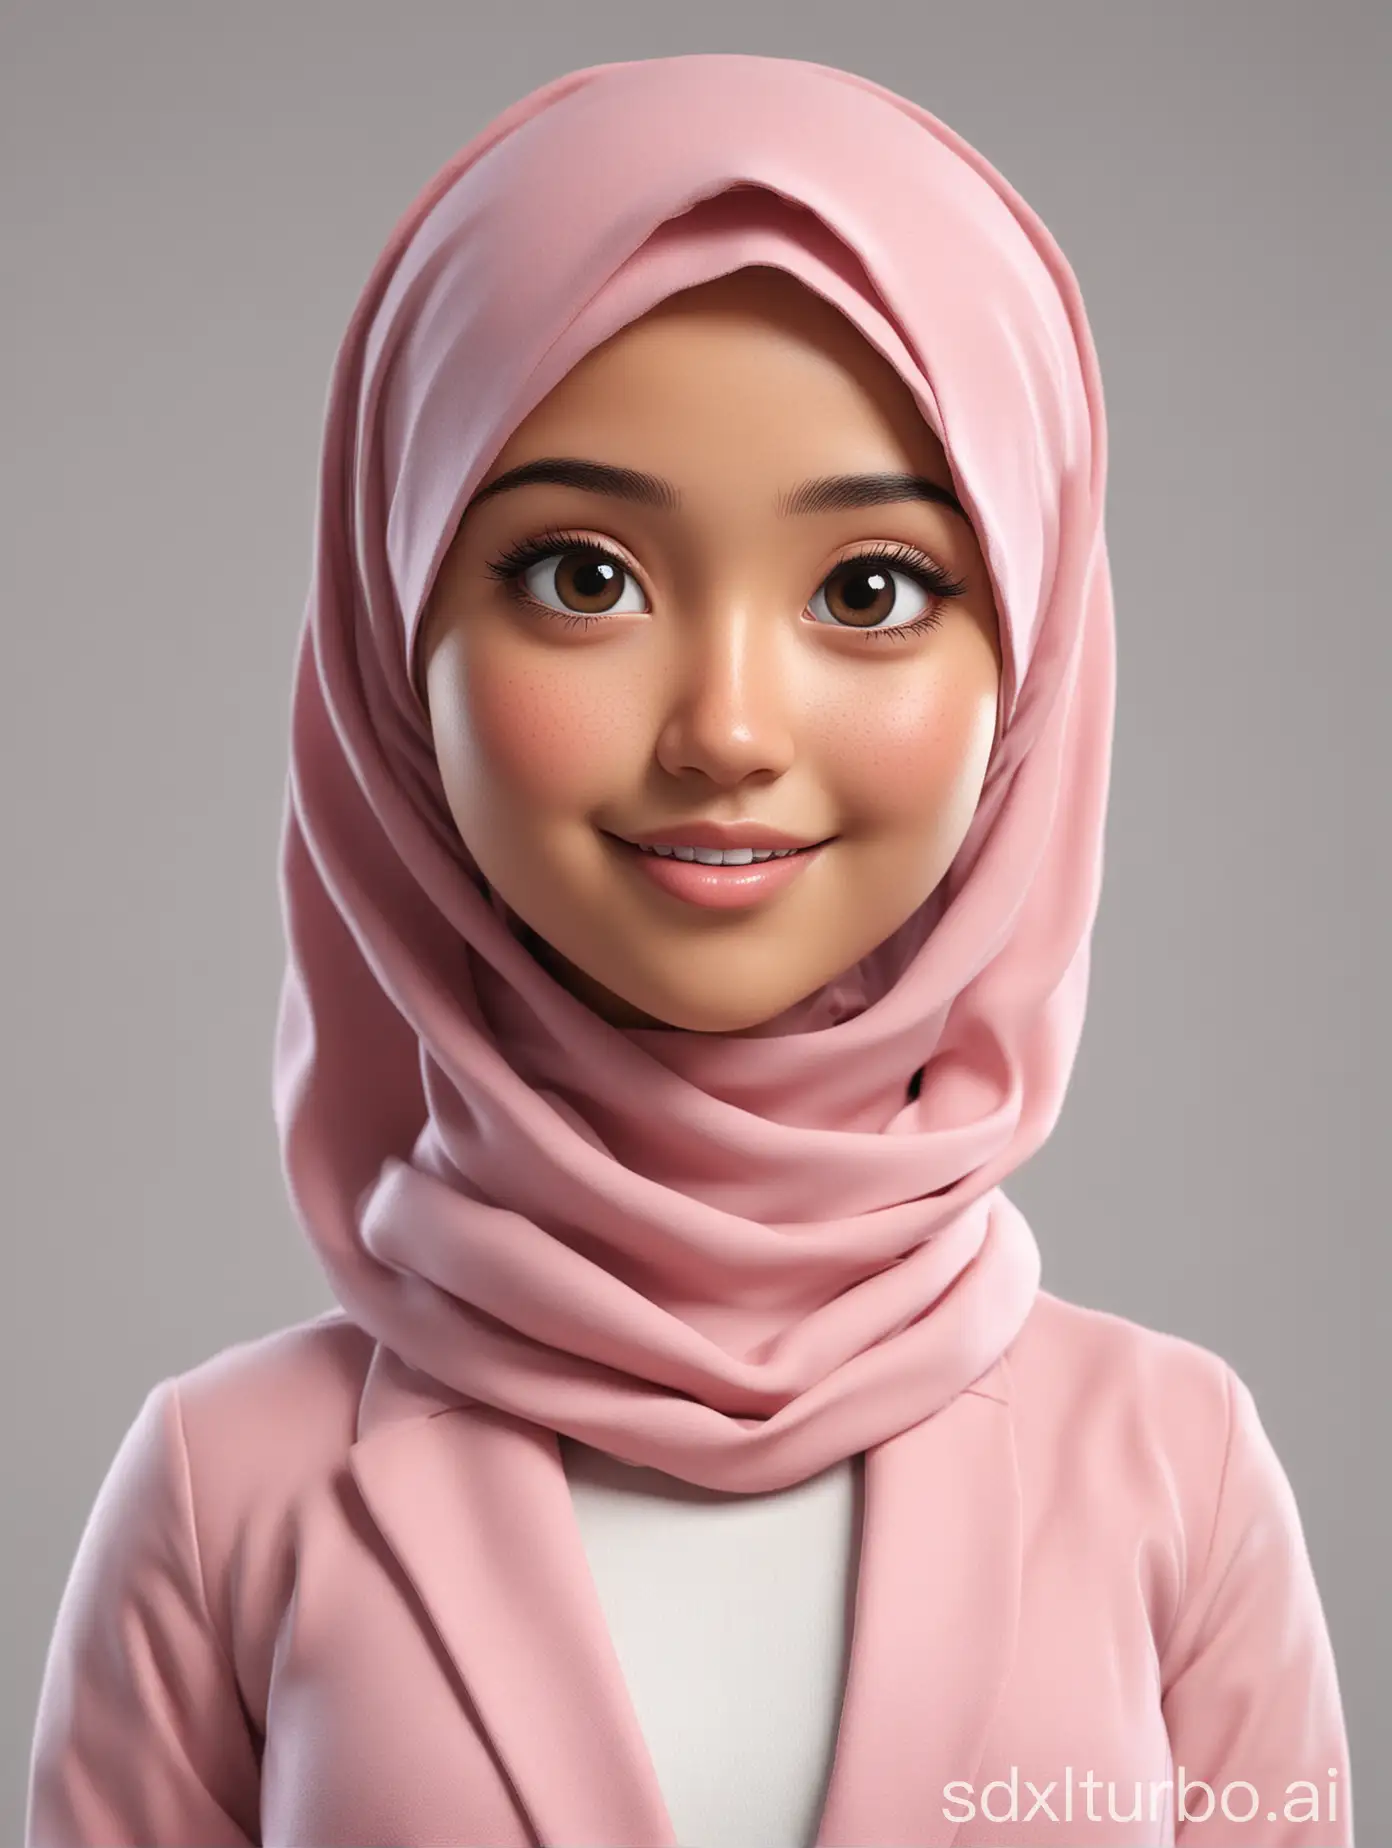 Indonesian-Girl-in-Pink-Blazer-and-Hijab-3D-Cartoon-Style-Portrait